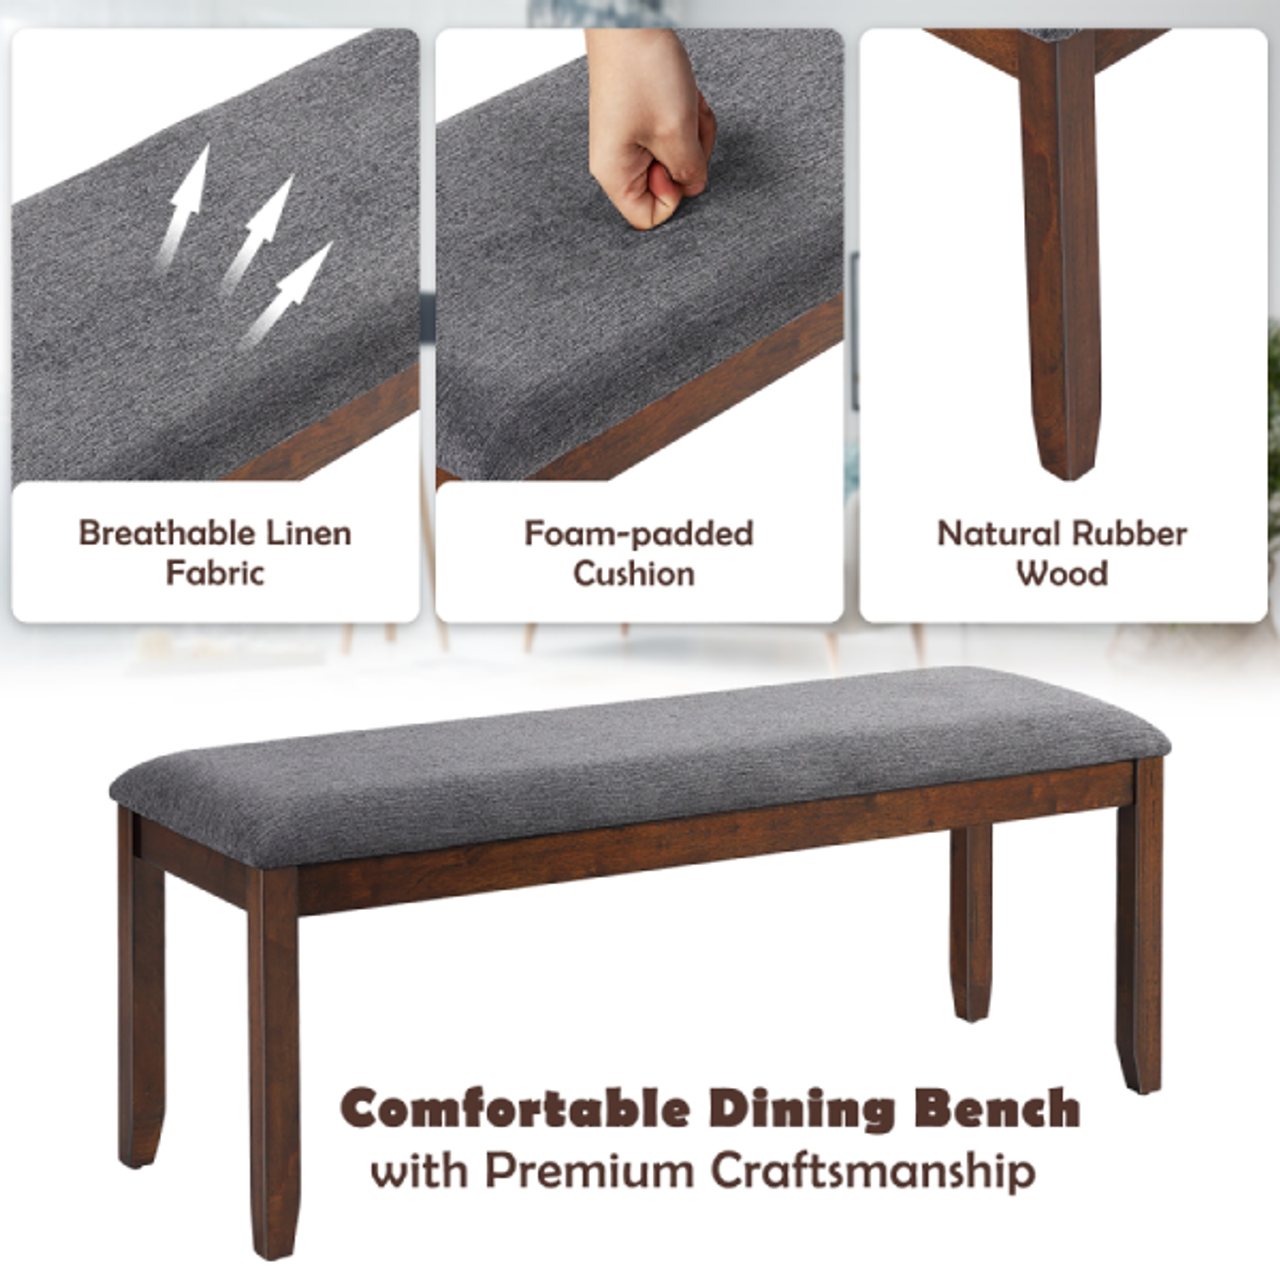 Upholstered Wood Entryway Bench product image